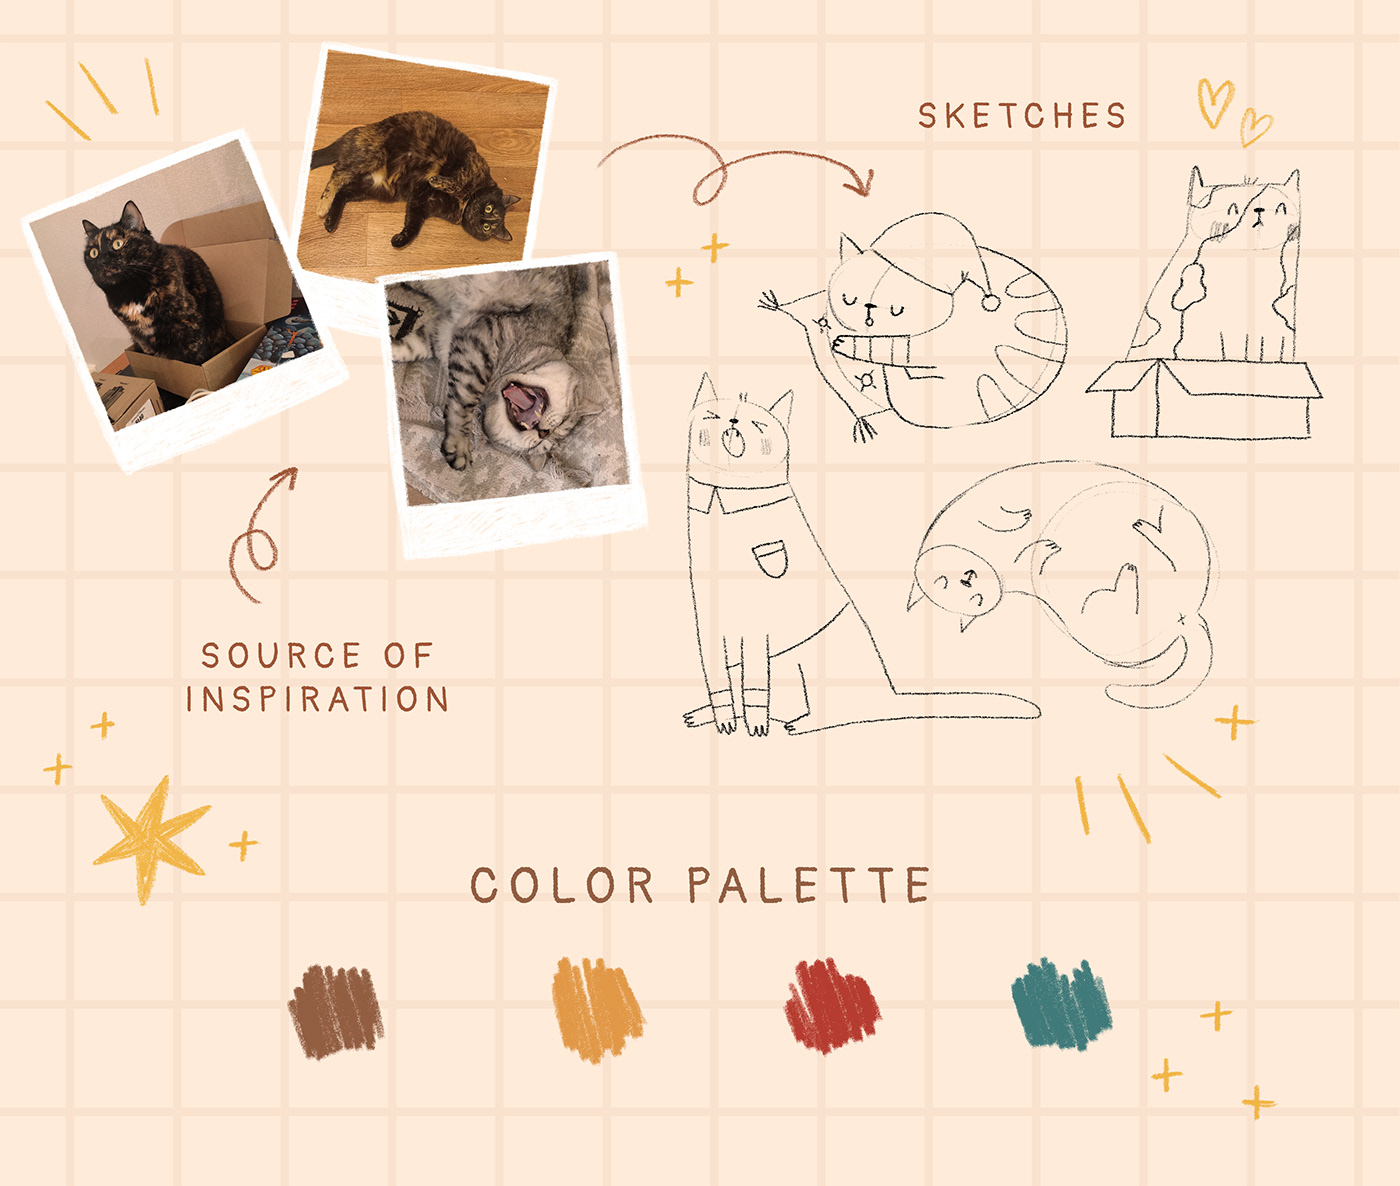 Photos of real cats and sketches inspired by them: a color palette: yellow, brown, maroon and teal